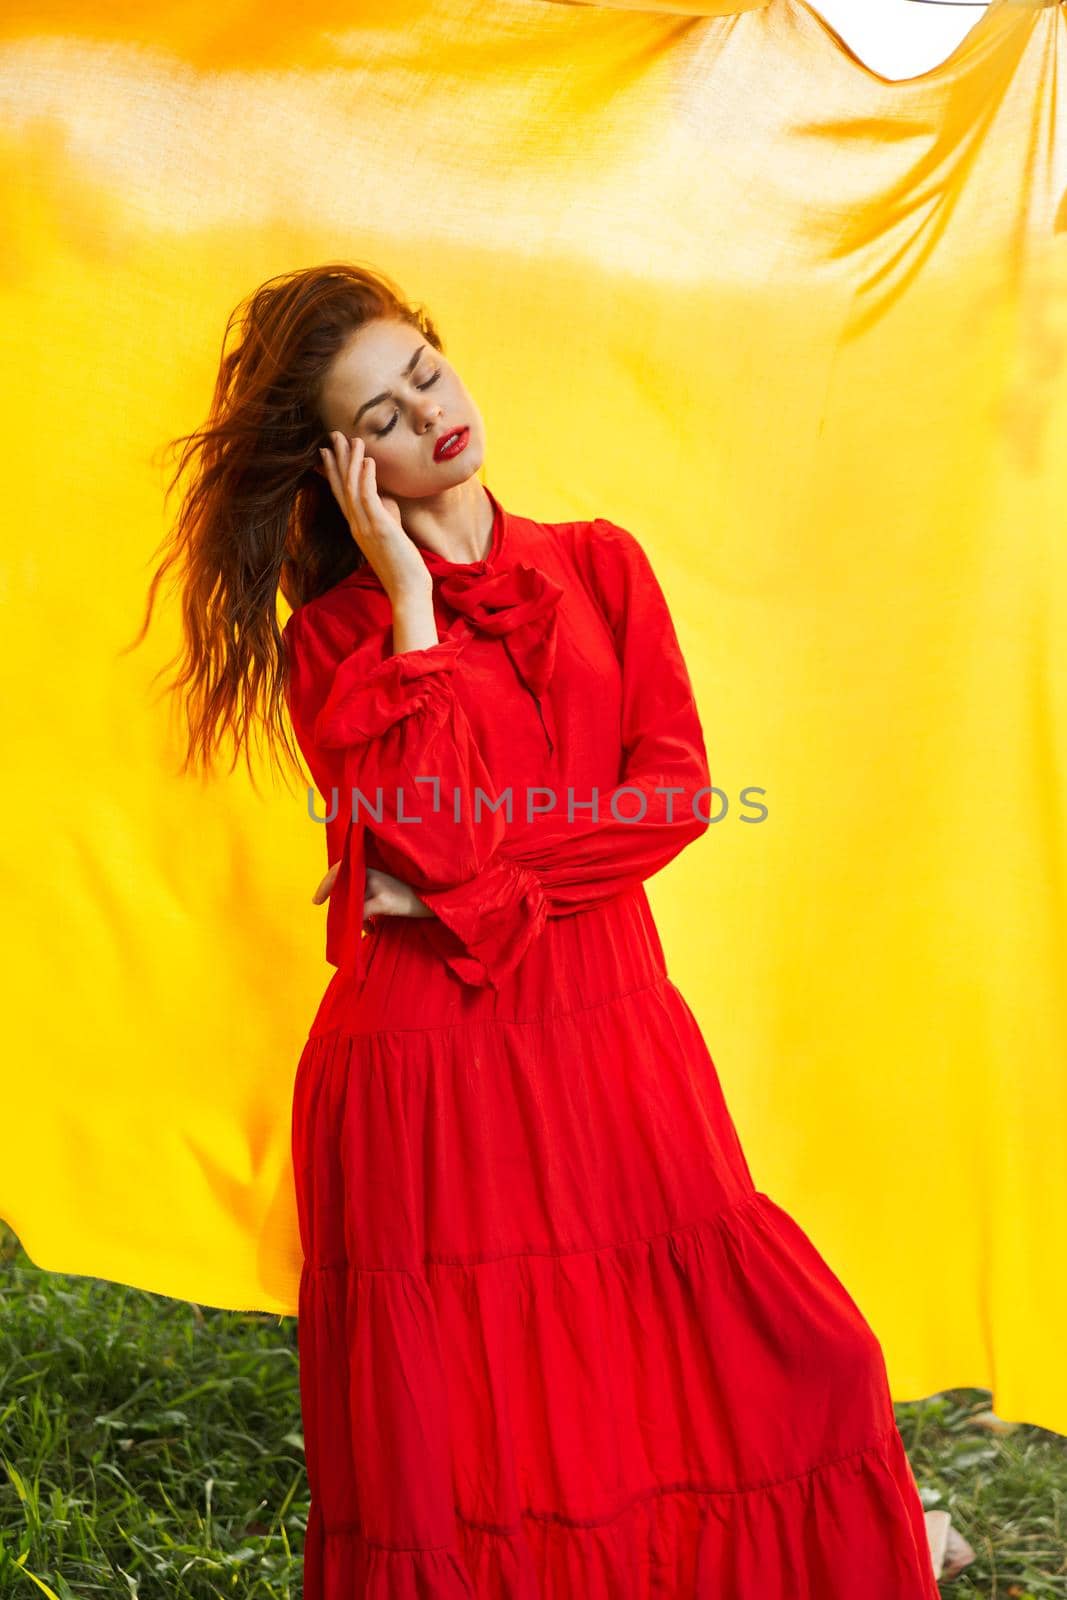 pretty woman in red dress yellow fabric on nature background. High quality photo